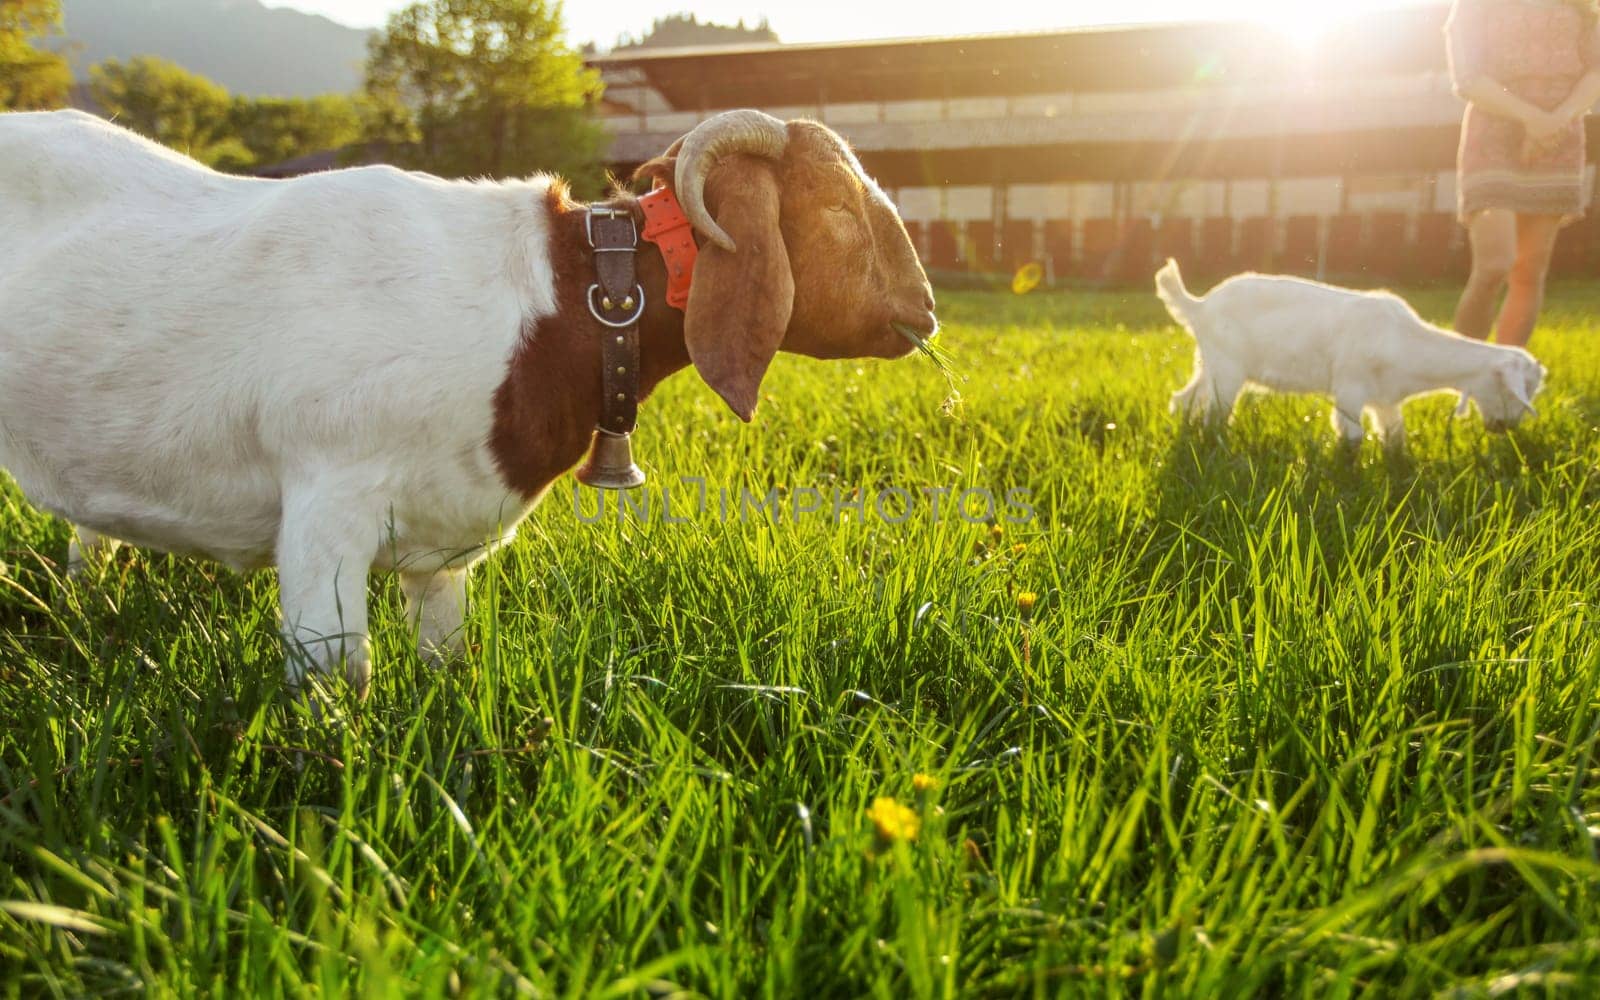 Anglo nubian / boer goat mutton, grazing on green spring meadow, small kid and blurred farm with strong backlight in background by Ivanko